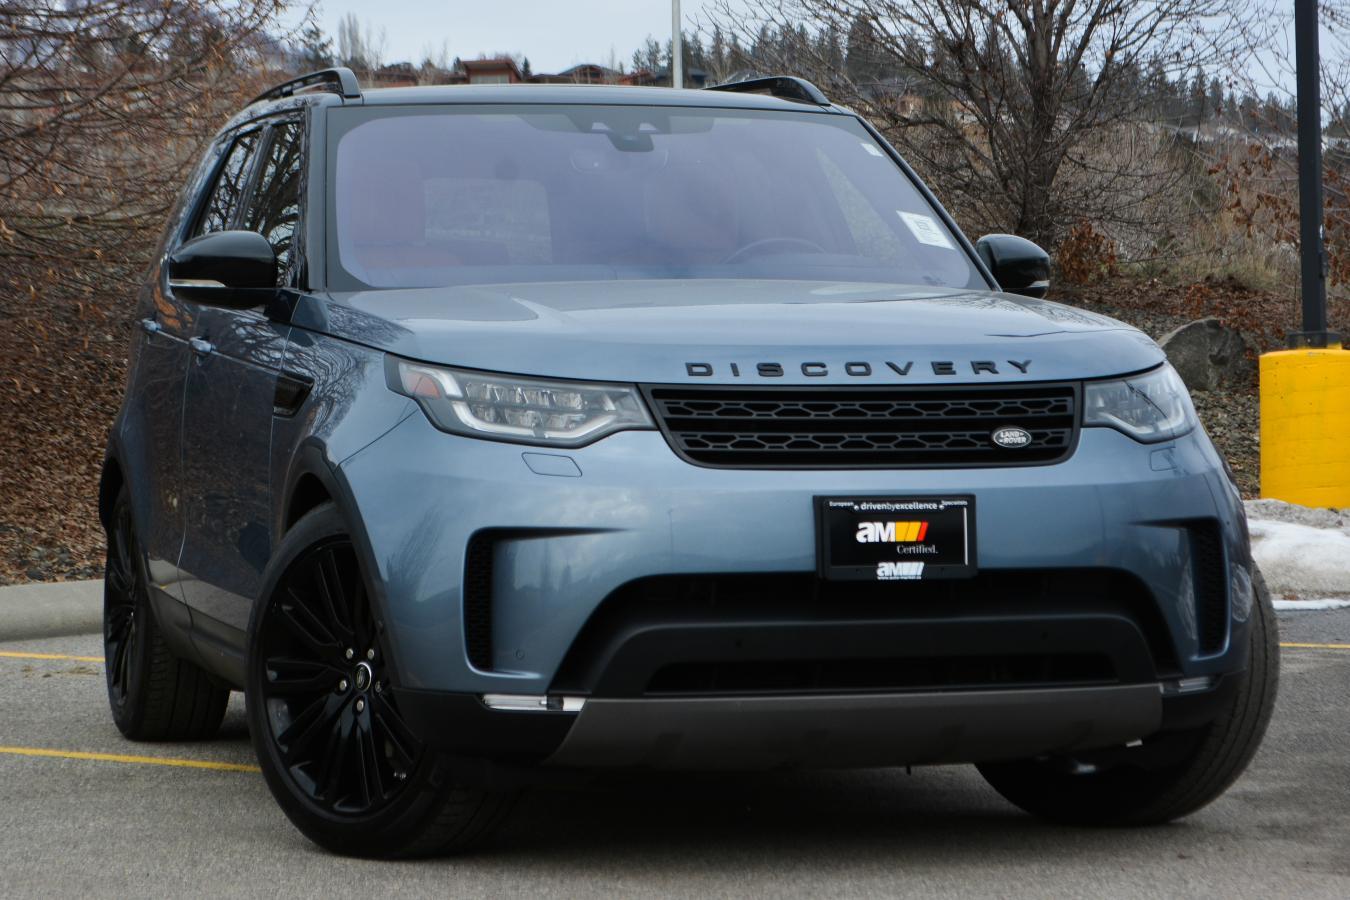 2019 Land Rover Discovery TD6 HSE Luxury 4WD, Diesel, 7 Passenger, Low Km